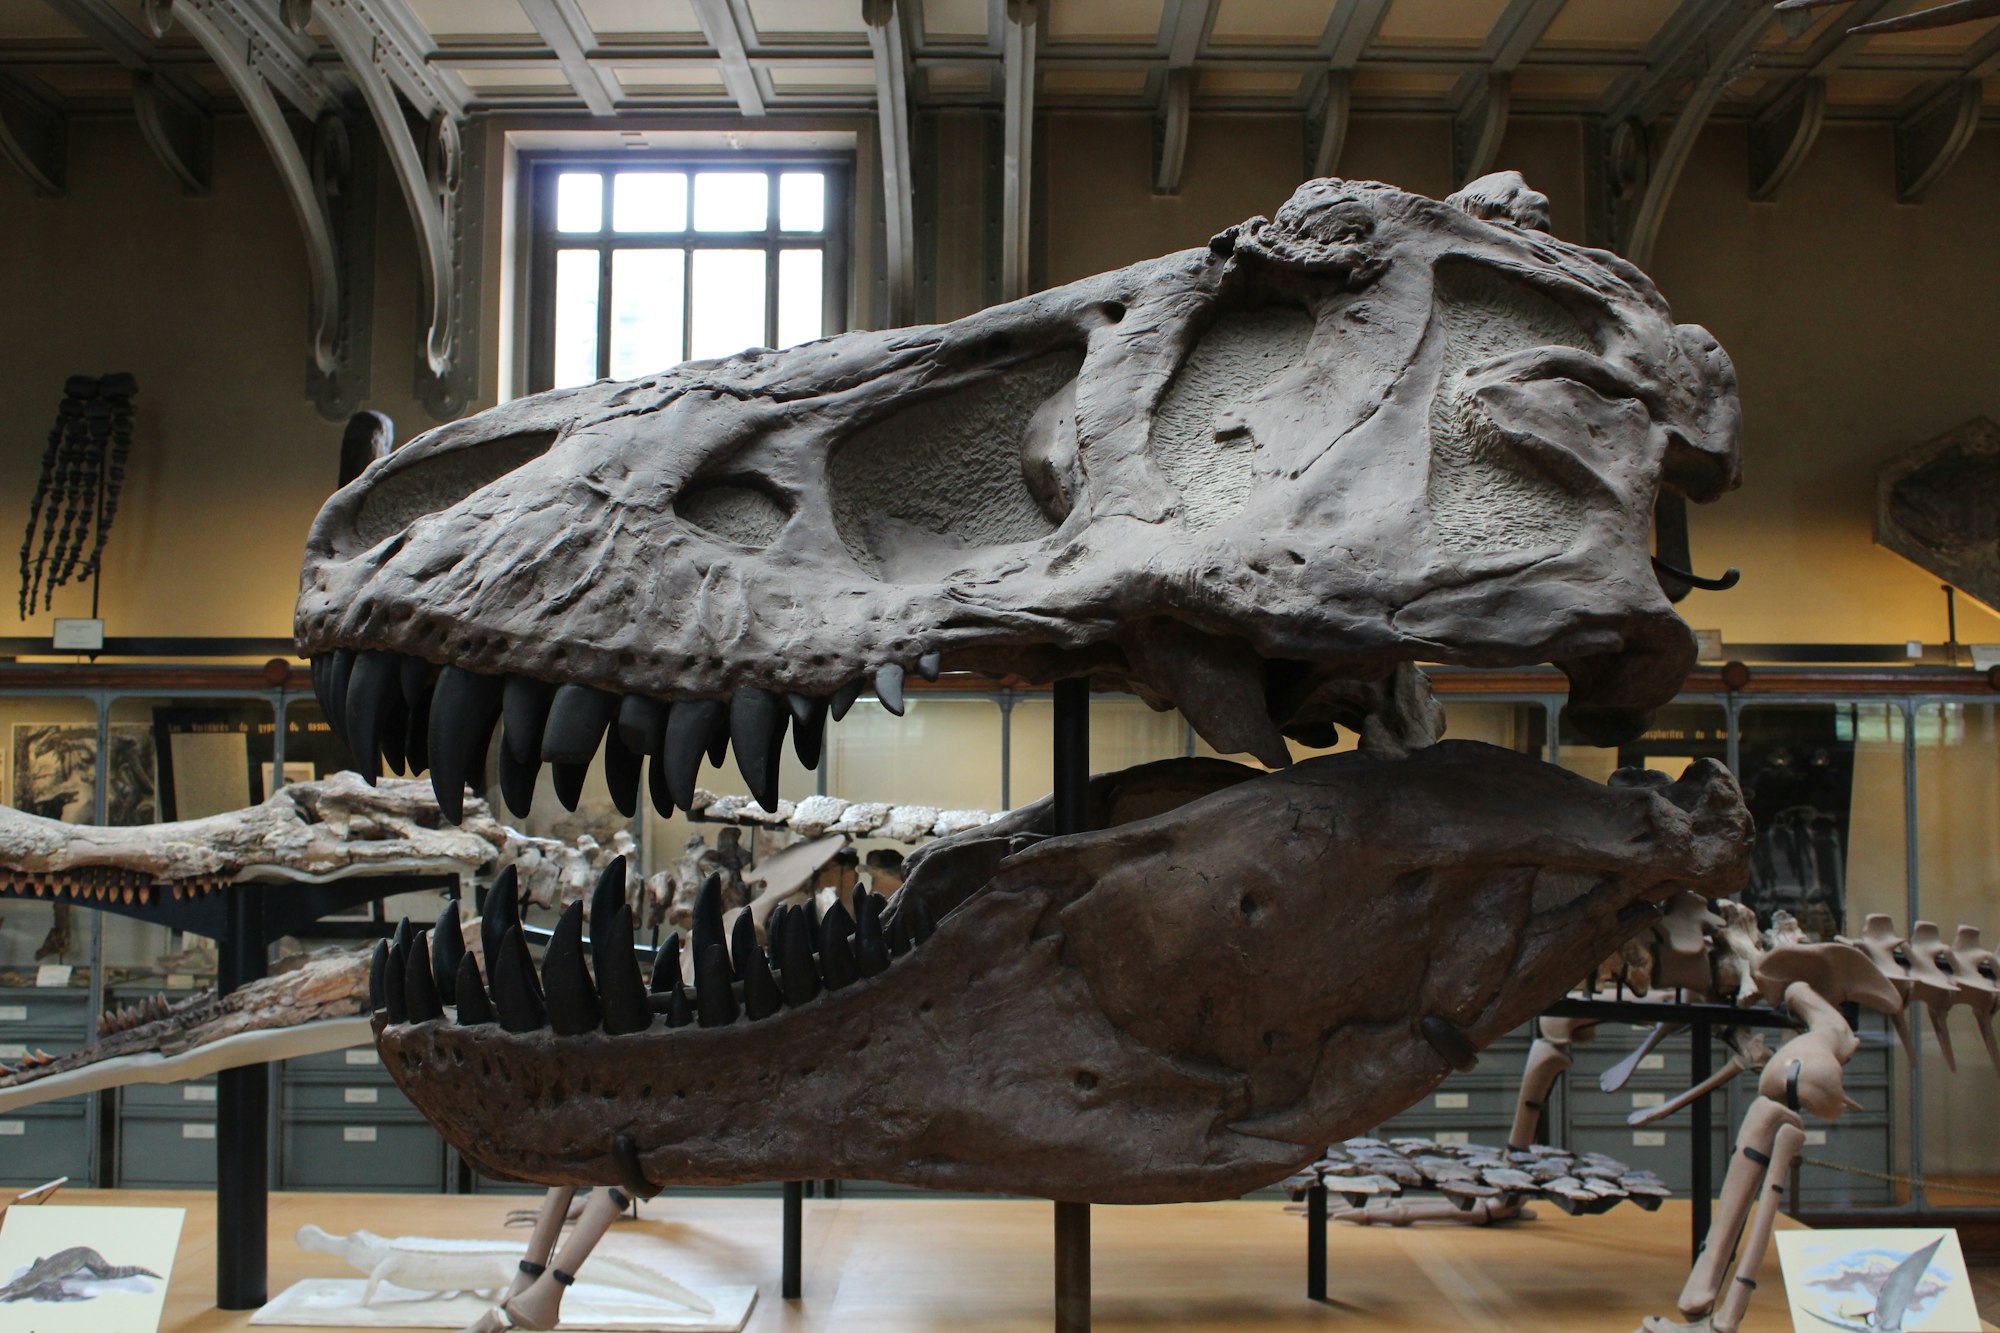 In Which Country Was The Largest Known T-Rex Skeleton Found?